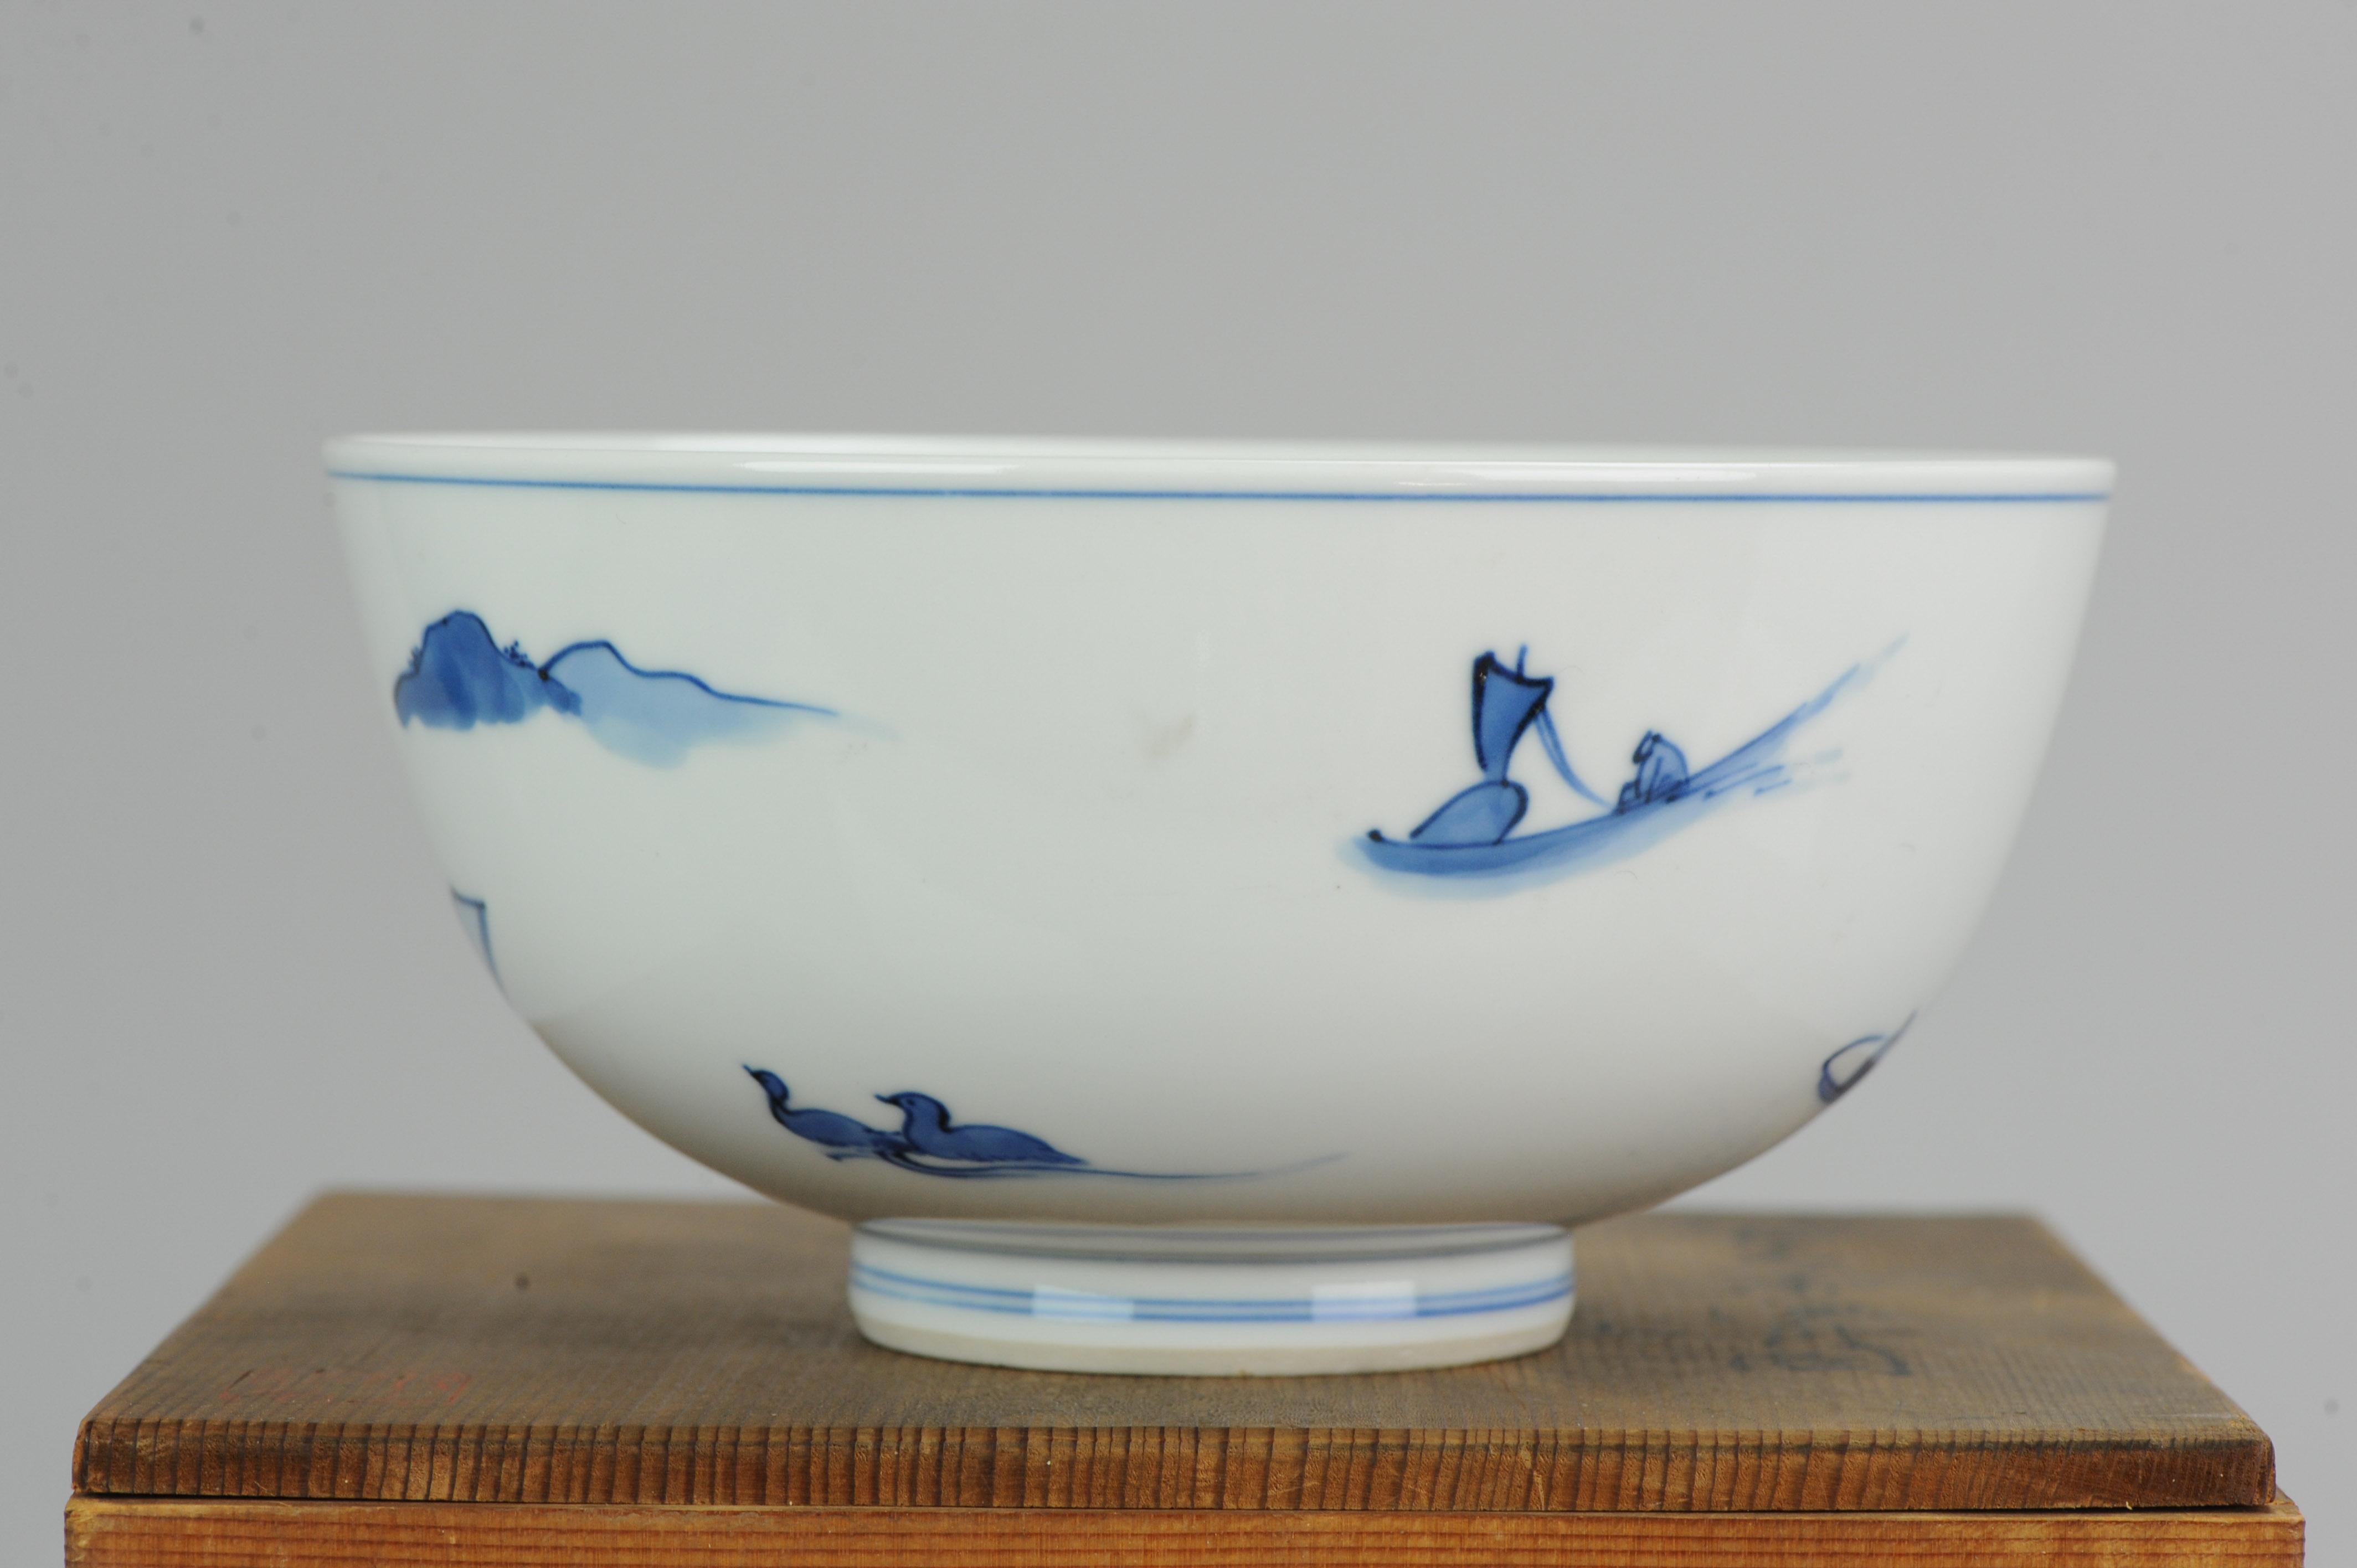 Great Japanese Bowl with Sea Landscape & Boats Arita Japan + Box, 20th Century.

Nice and very beautiful bowl.

Additional information:
Material: Porcelain & Pottery
Type: Bowls
Region of Origin: Japan
Period: 20th Century 
Original/Reproduction: